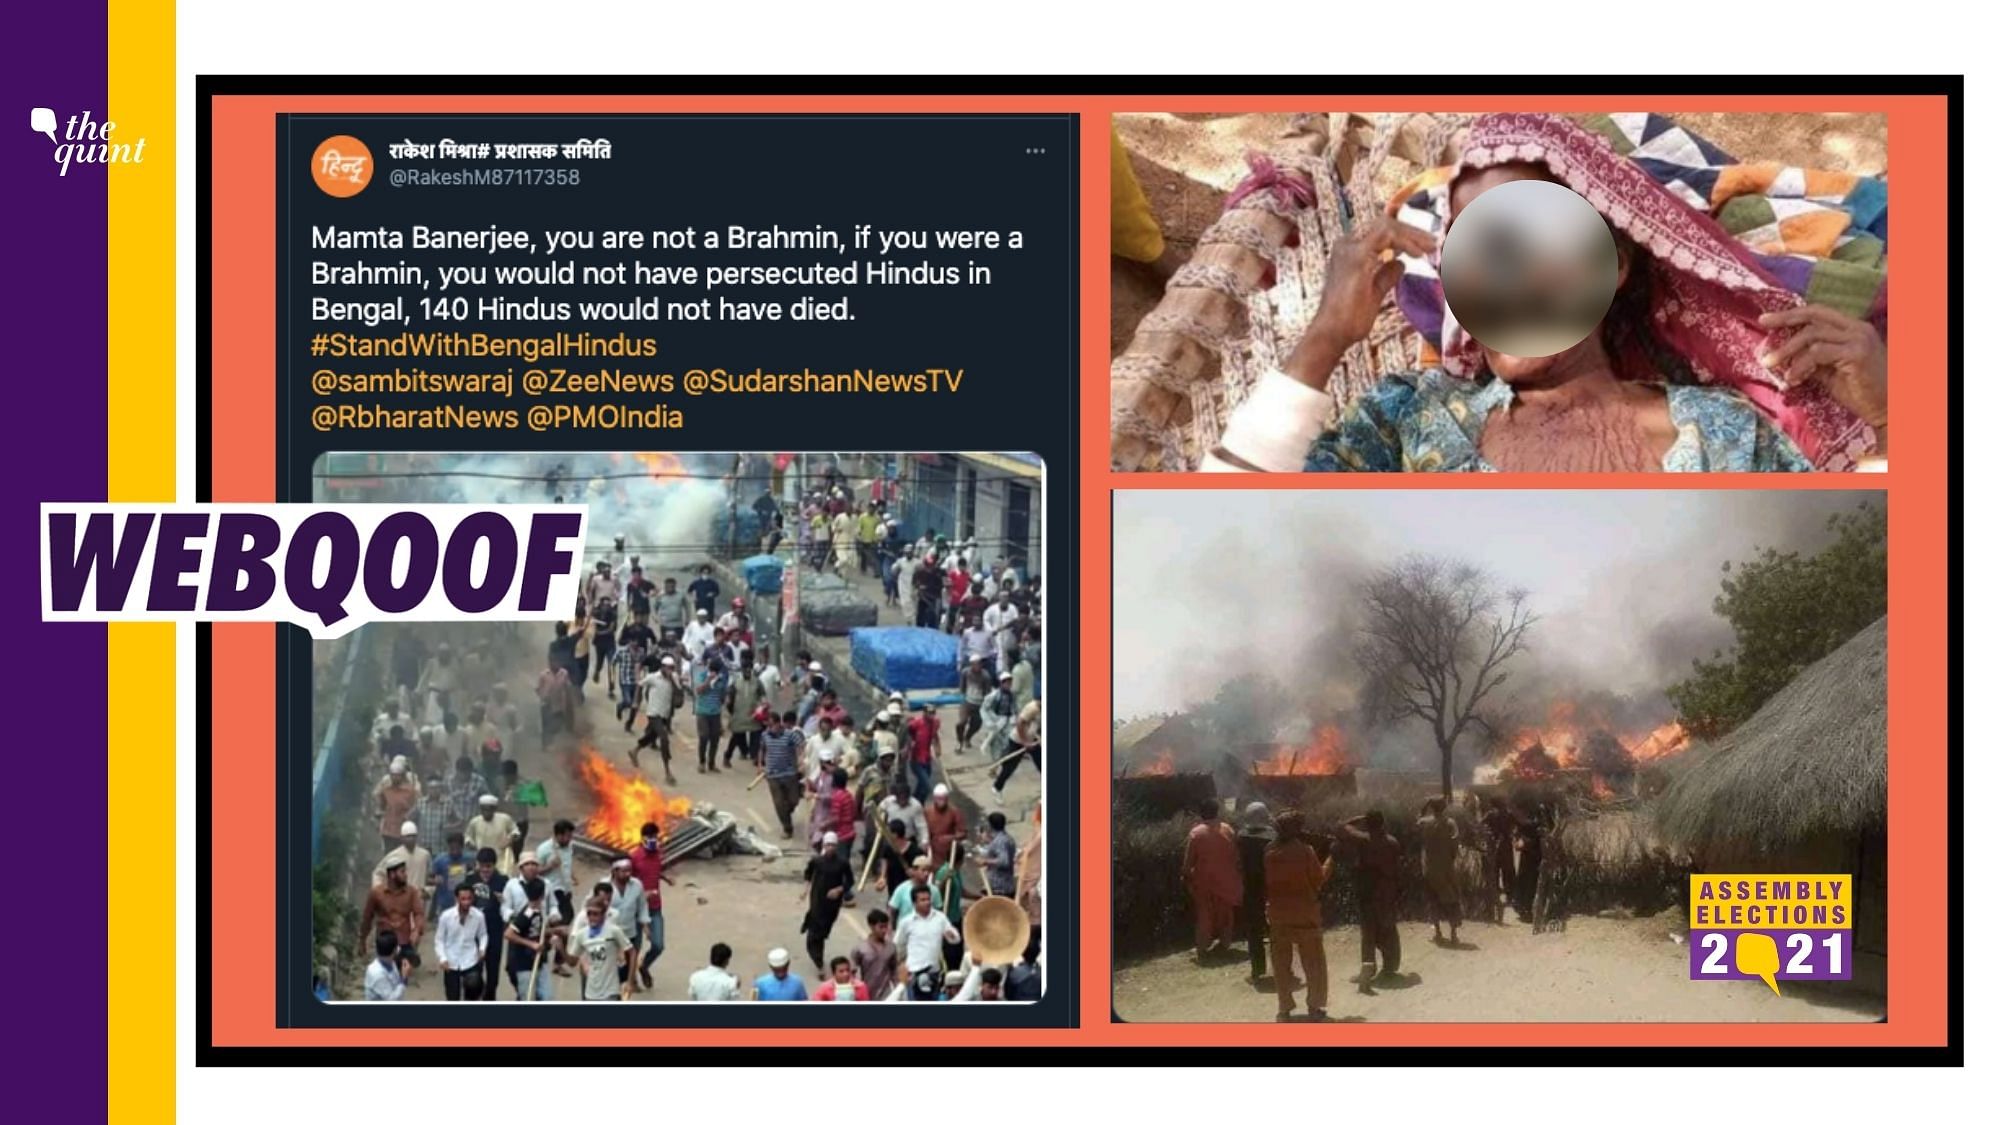 Several unrelated images from Pakistan and Bangladesh are being shared on the internet to insinuate that the Hindus are being persecuted in West Bengal.